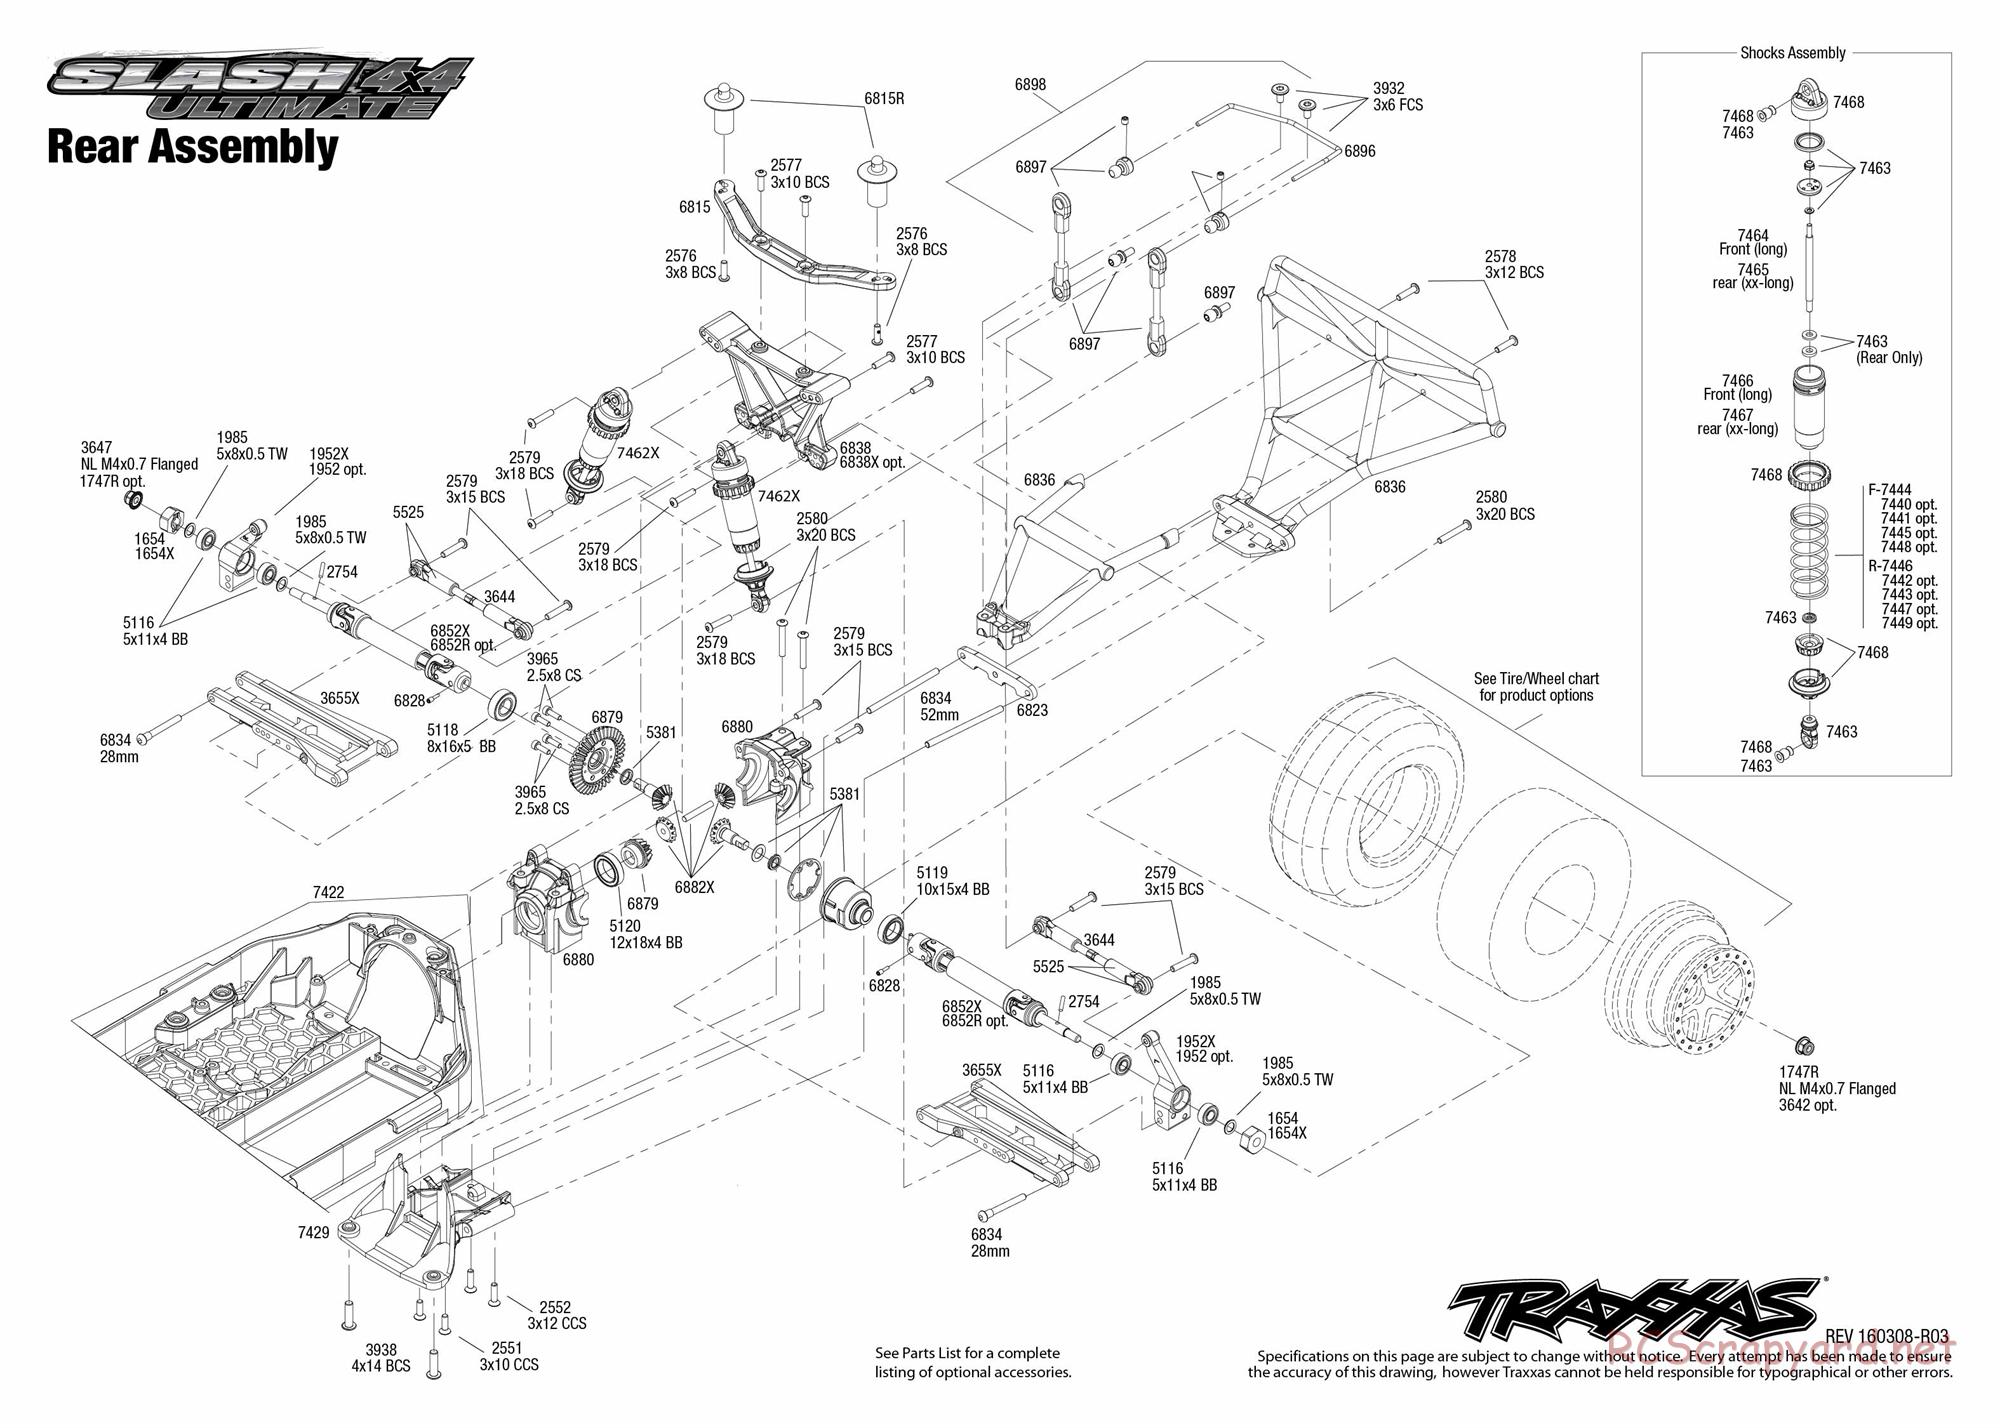 Traxxas - Slash 4x4 Ultimate (2015) - Exploded Views - Page 3